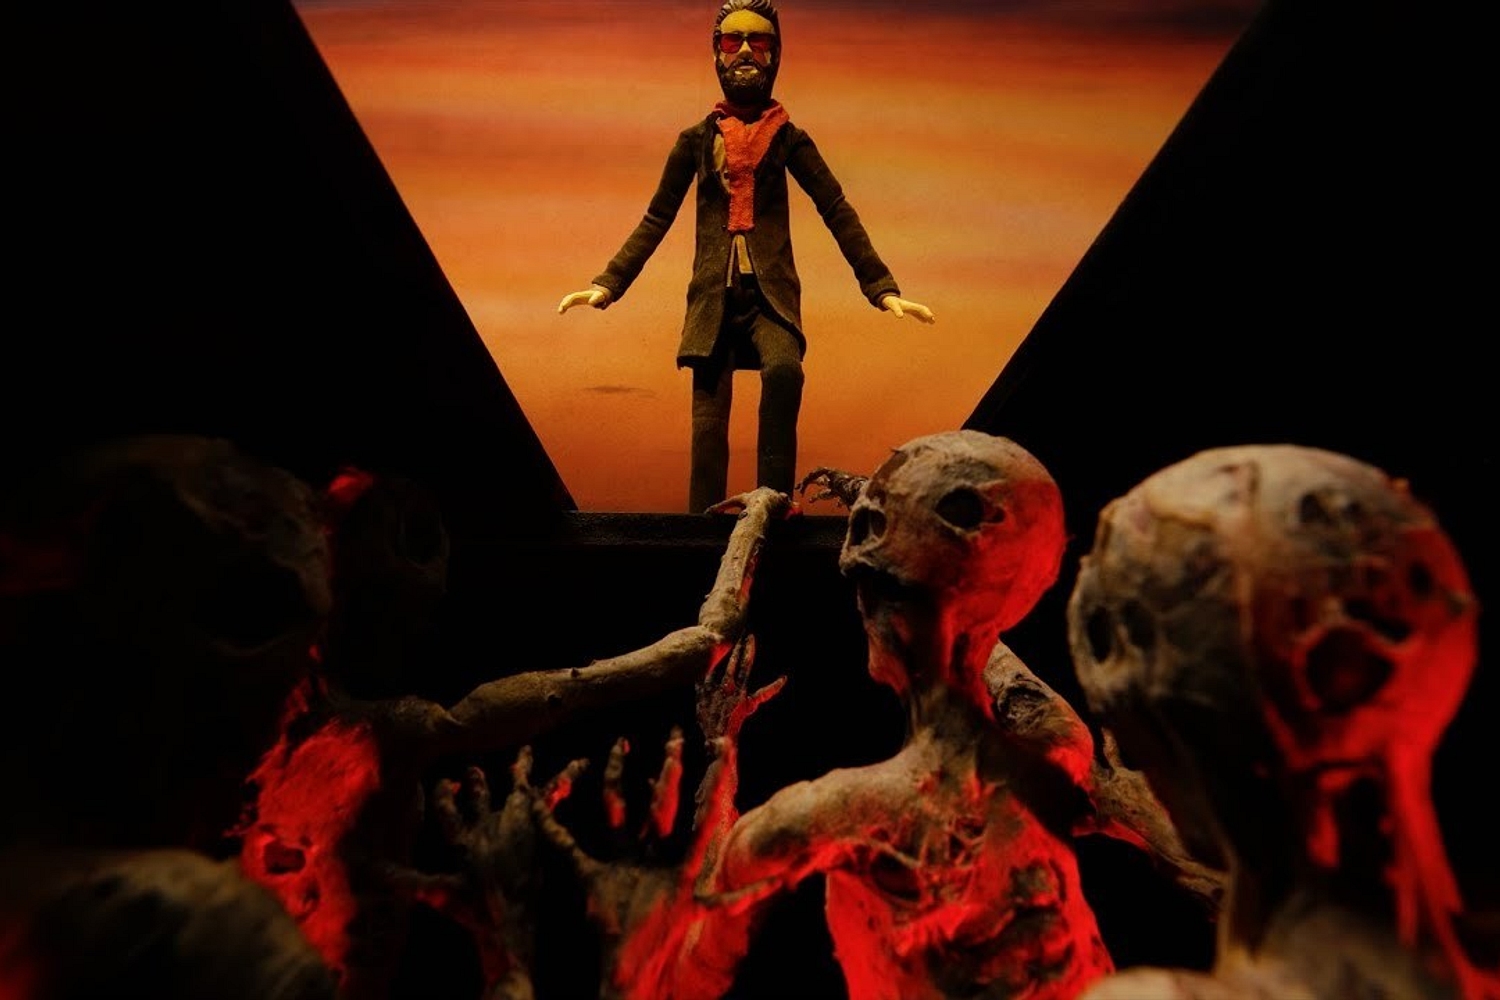 Father John Misty joins the Grim Reaper in claymation video for new track ‘Please Don’t Die’